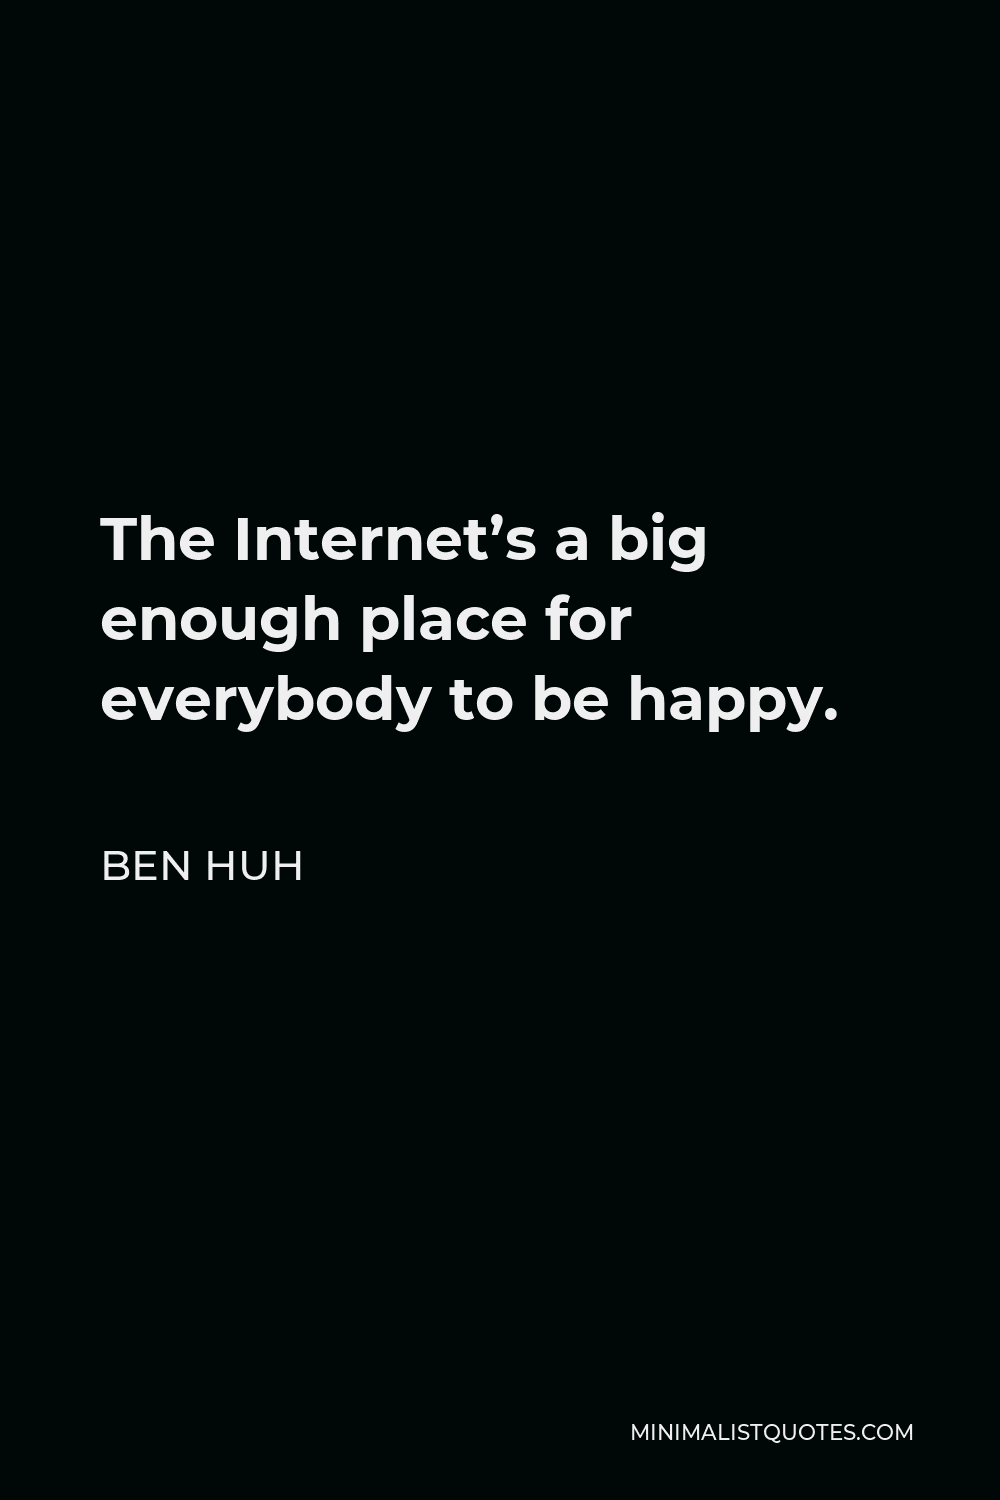 Ben Huh Quote - The Internet’s a big enough place for everybody to be happy.